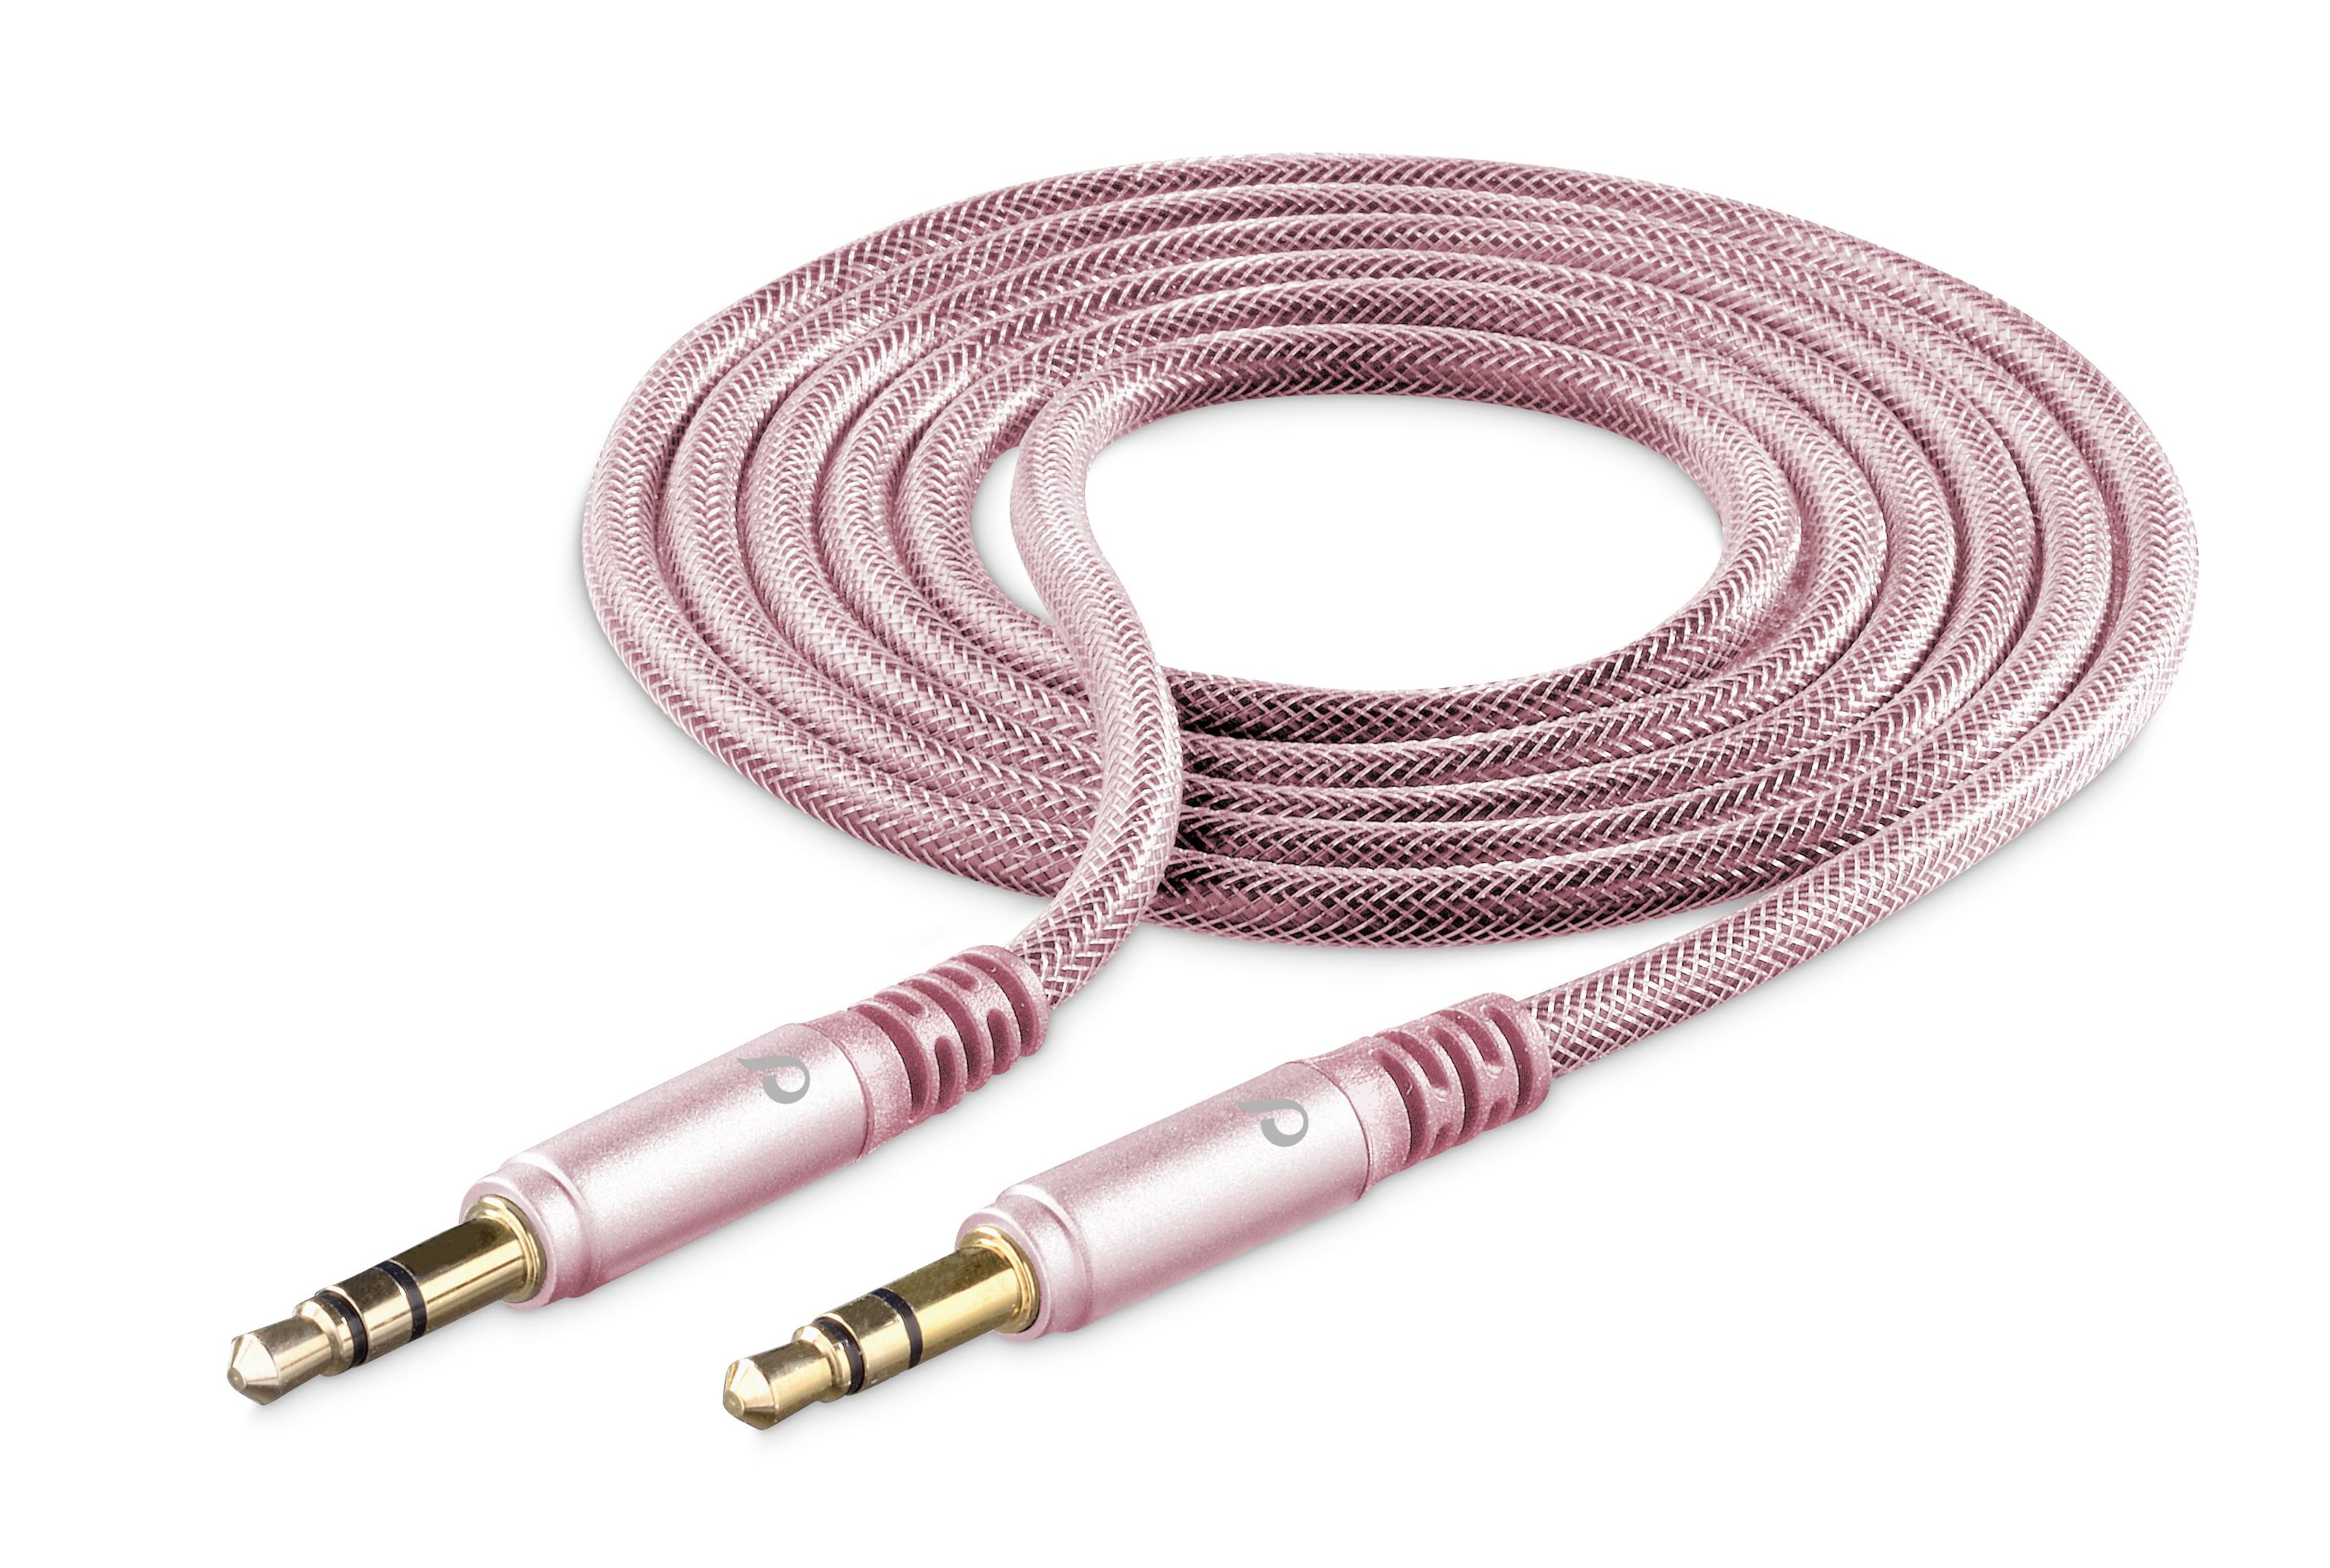 UD cble aux, 3,5mm to 3,5 mm jack, rose